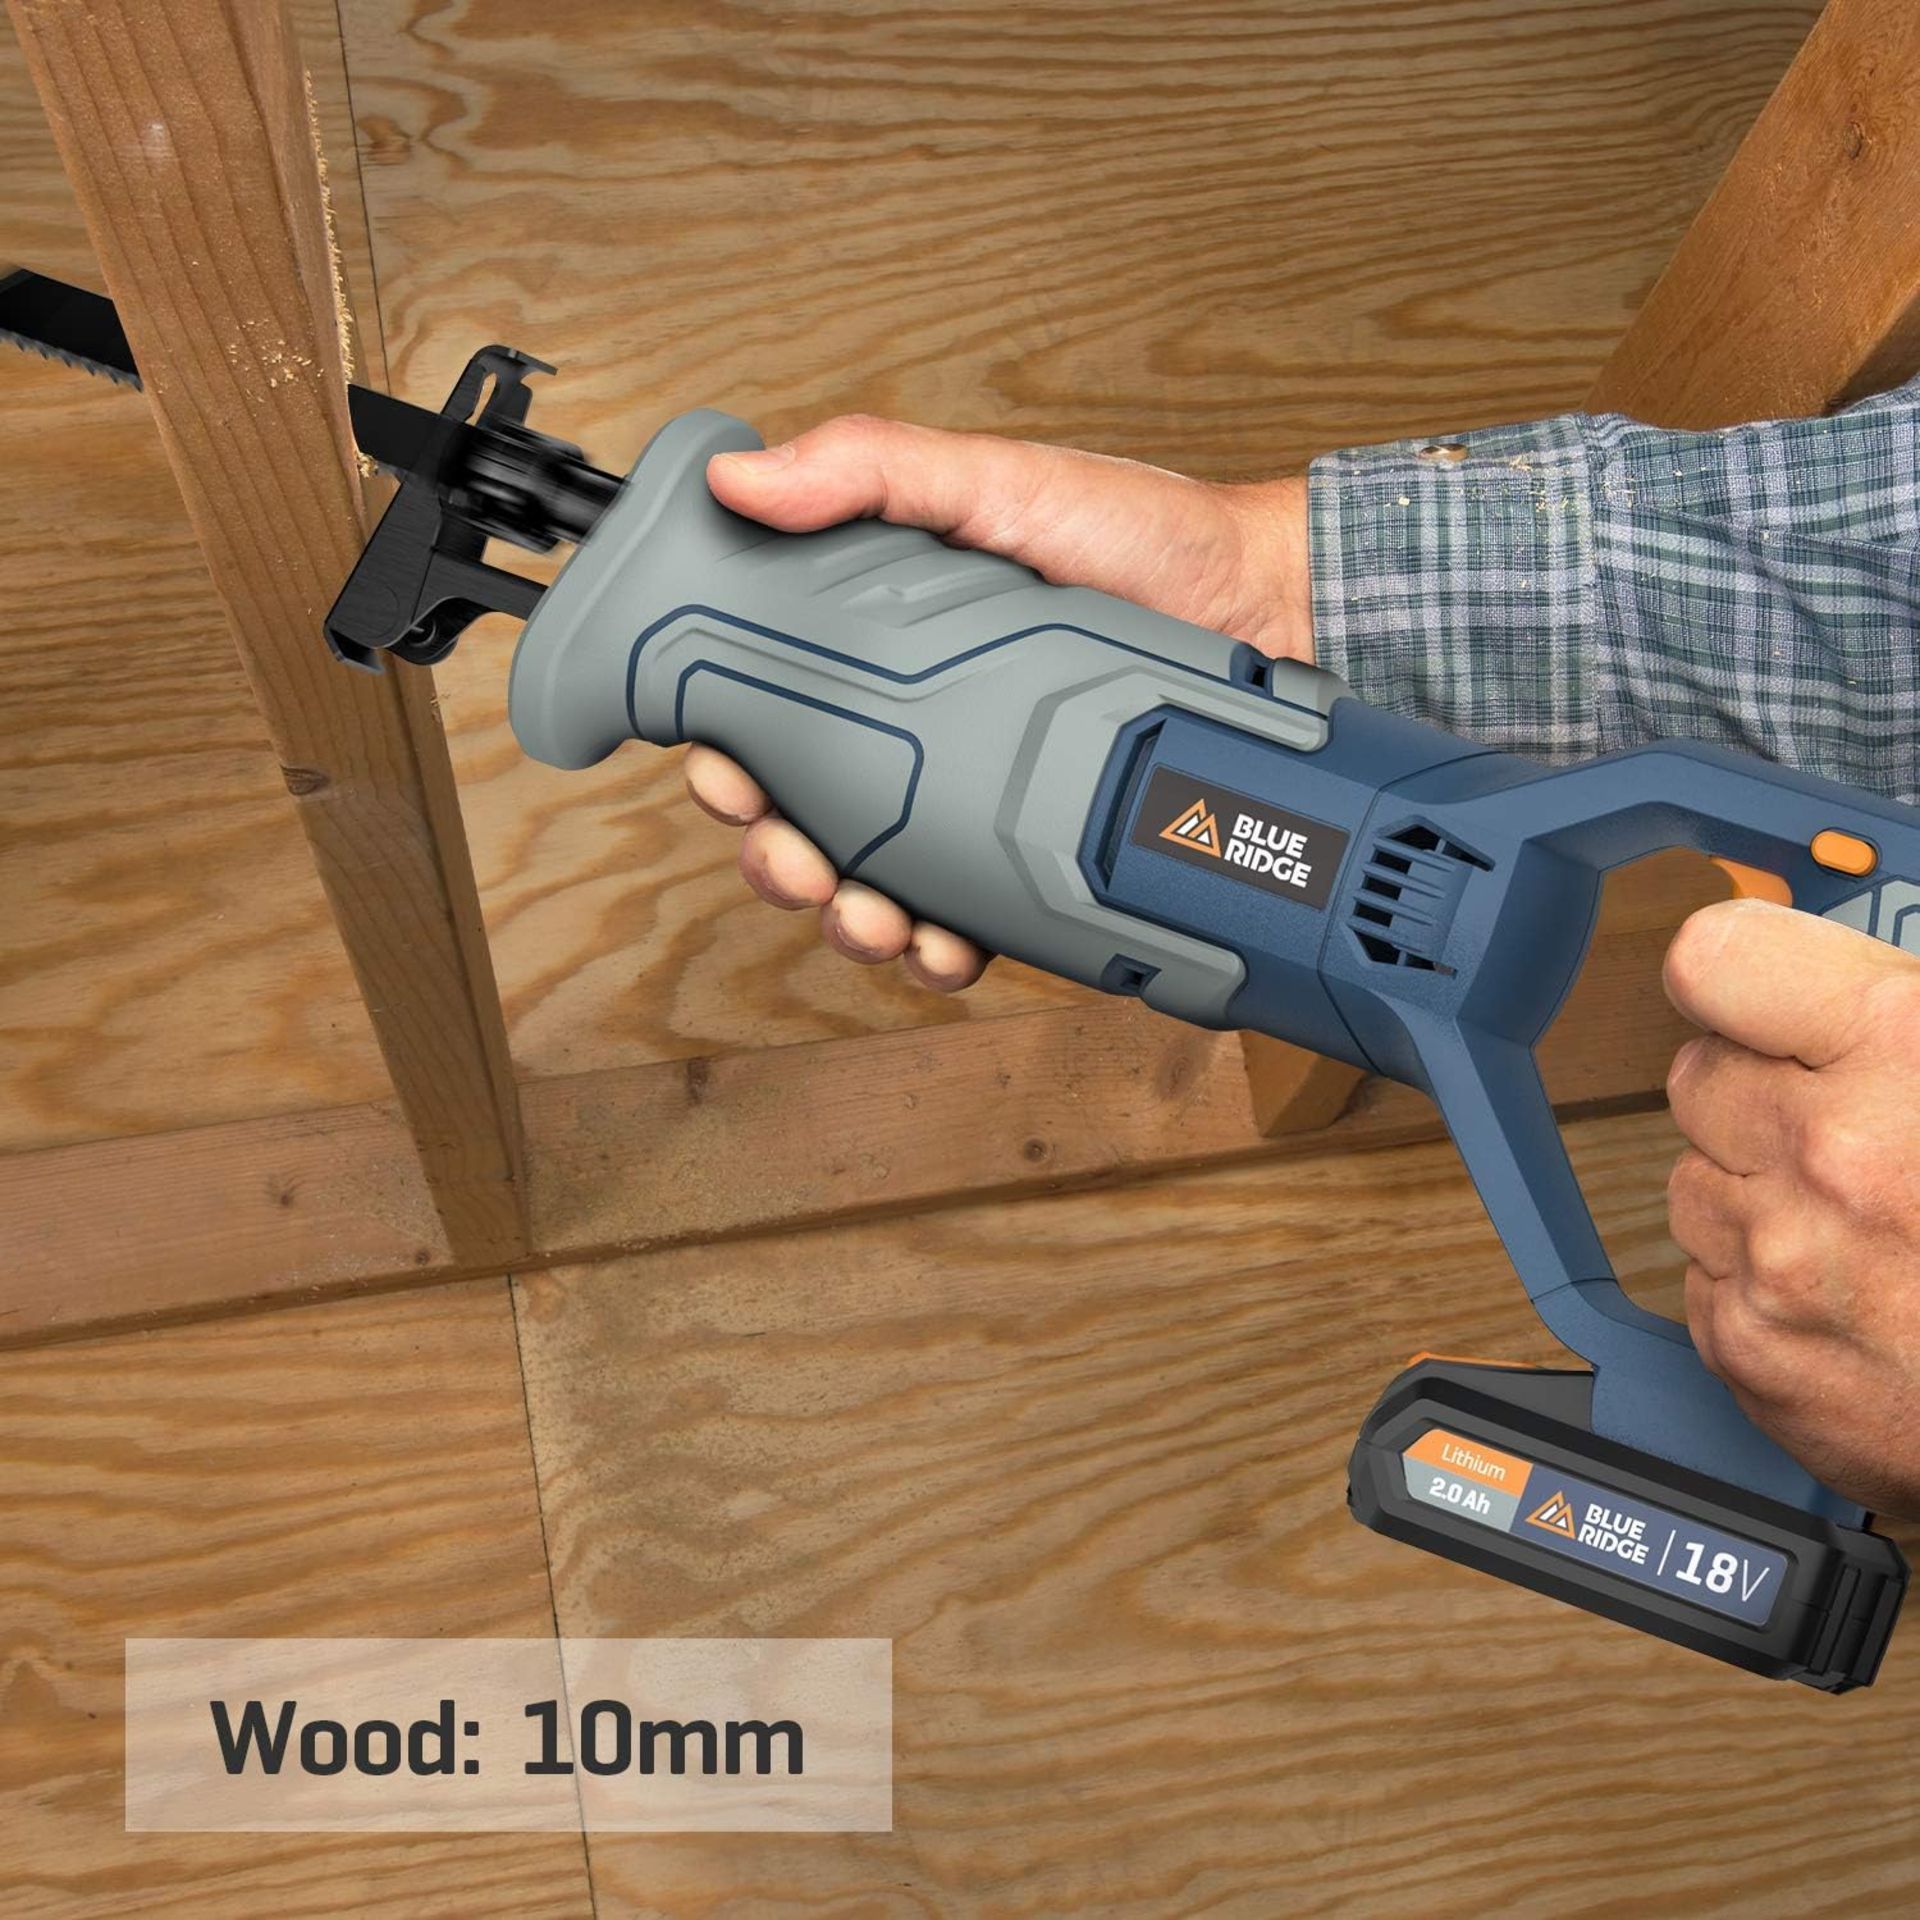 3x NEW & BOXED BLUE RIDGE 18V Reciprocating Cordless Sabre Saw with 2.0Ah Battery. RRP £99 EACH. - Image 4 of 7